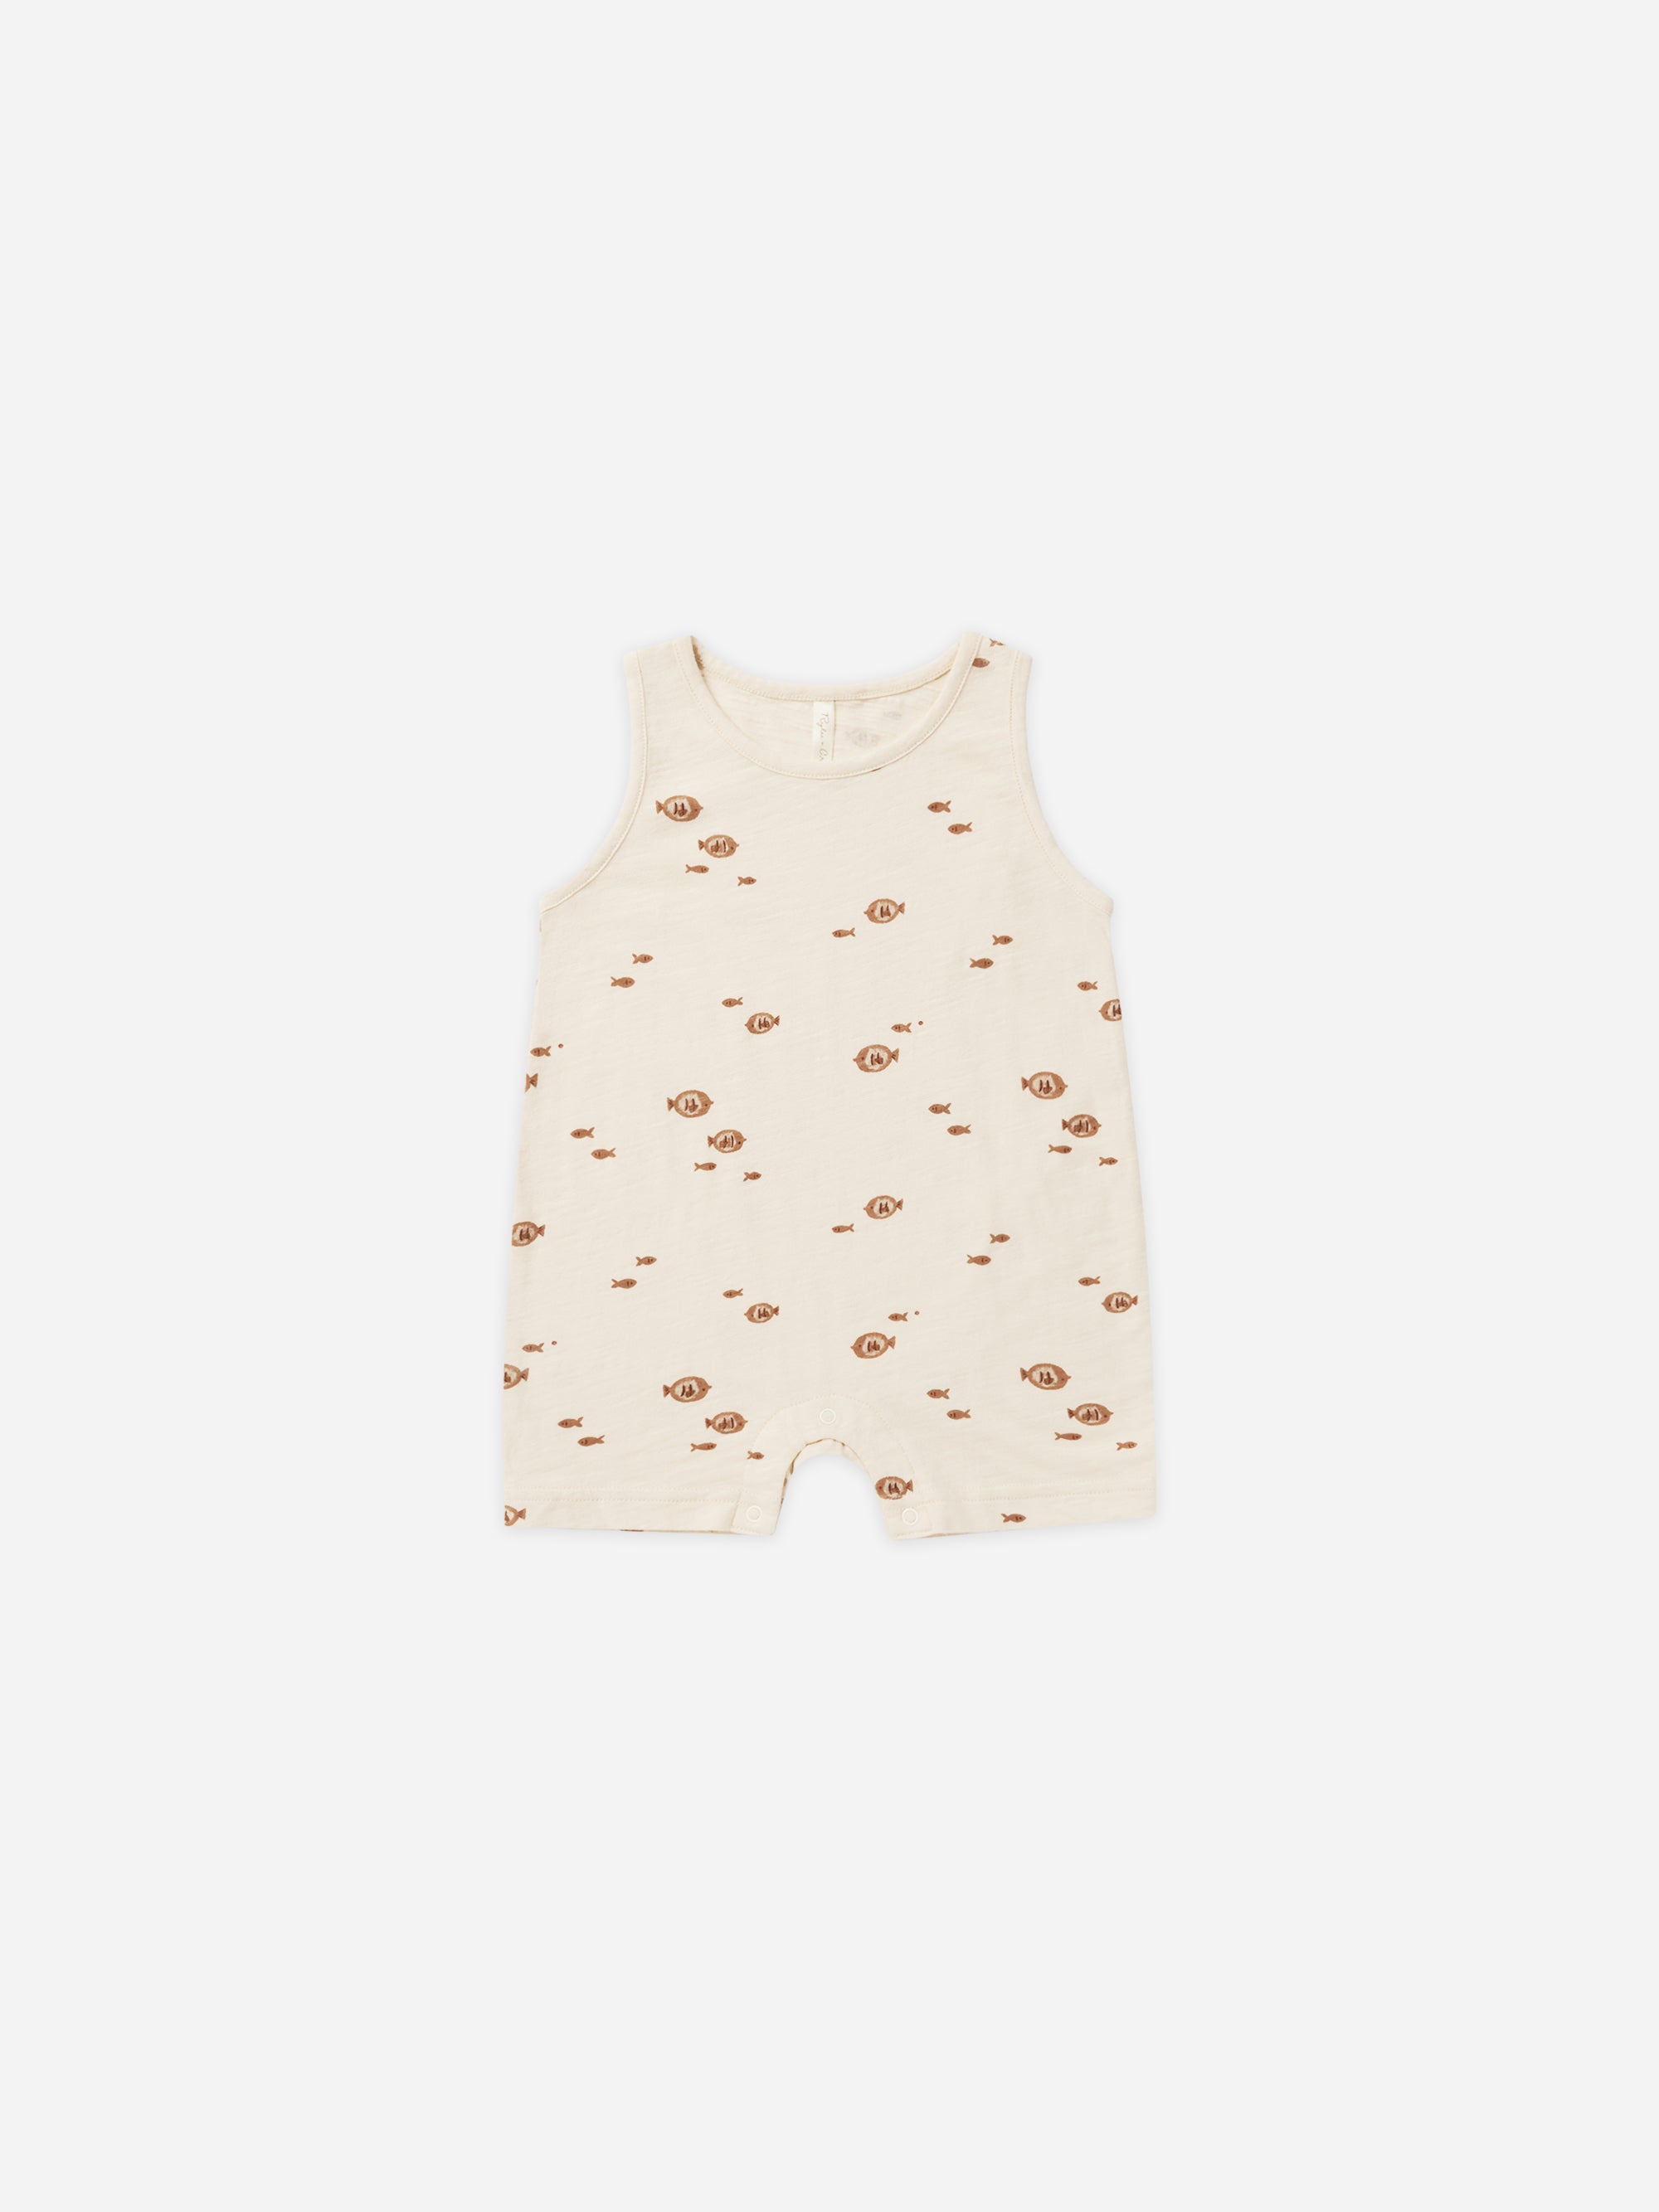 Sleeveless One-Piece || Fish - Rylee + Cru | Kids Clothes | Trendy Baby Clothes | Modern Infant Outfits |